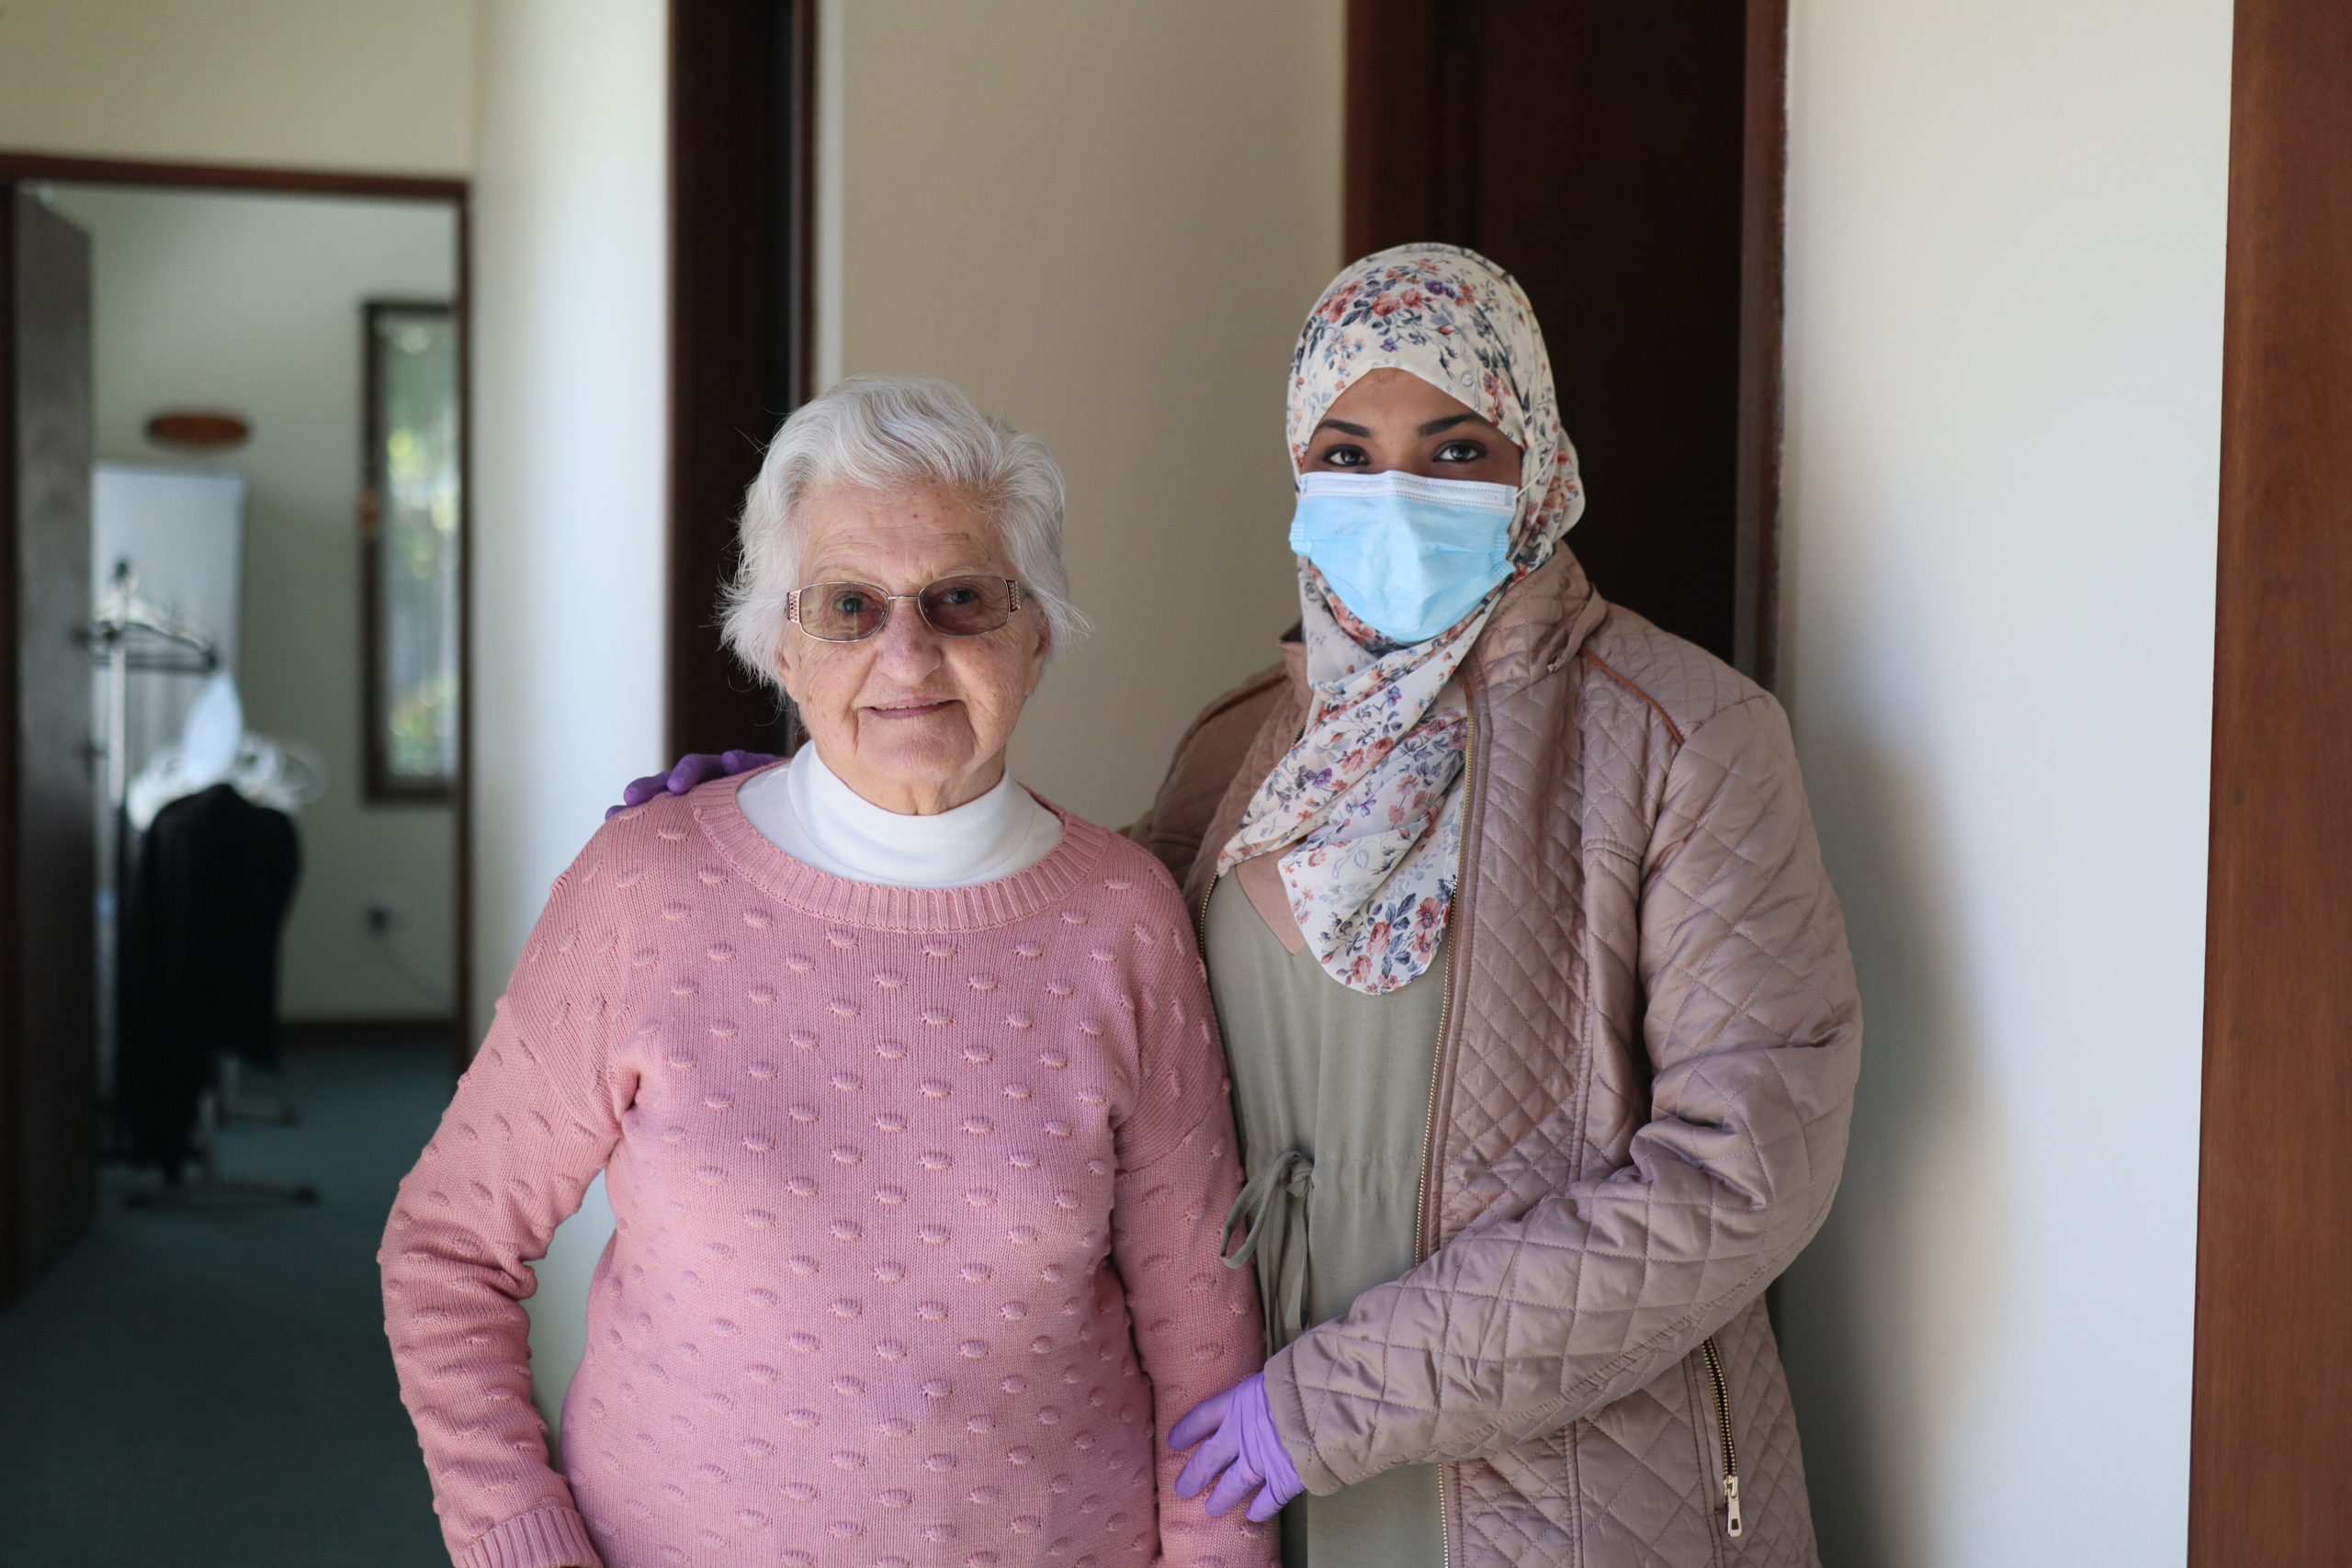 Carer and client mask